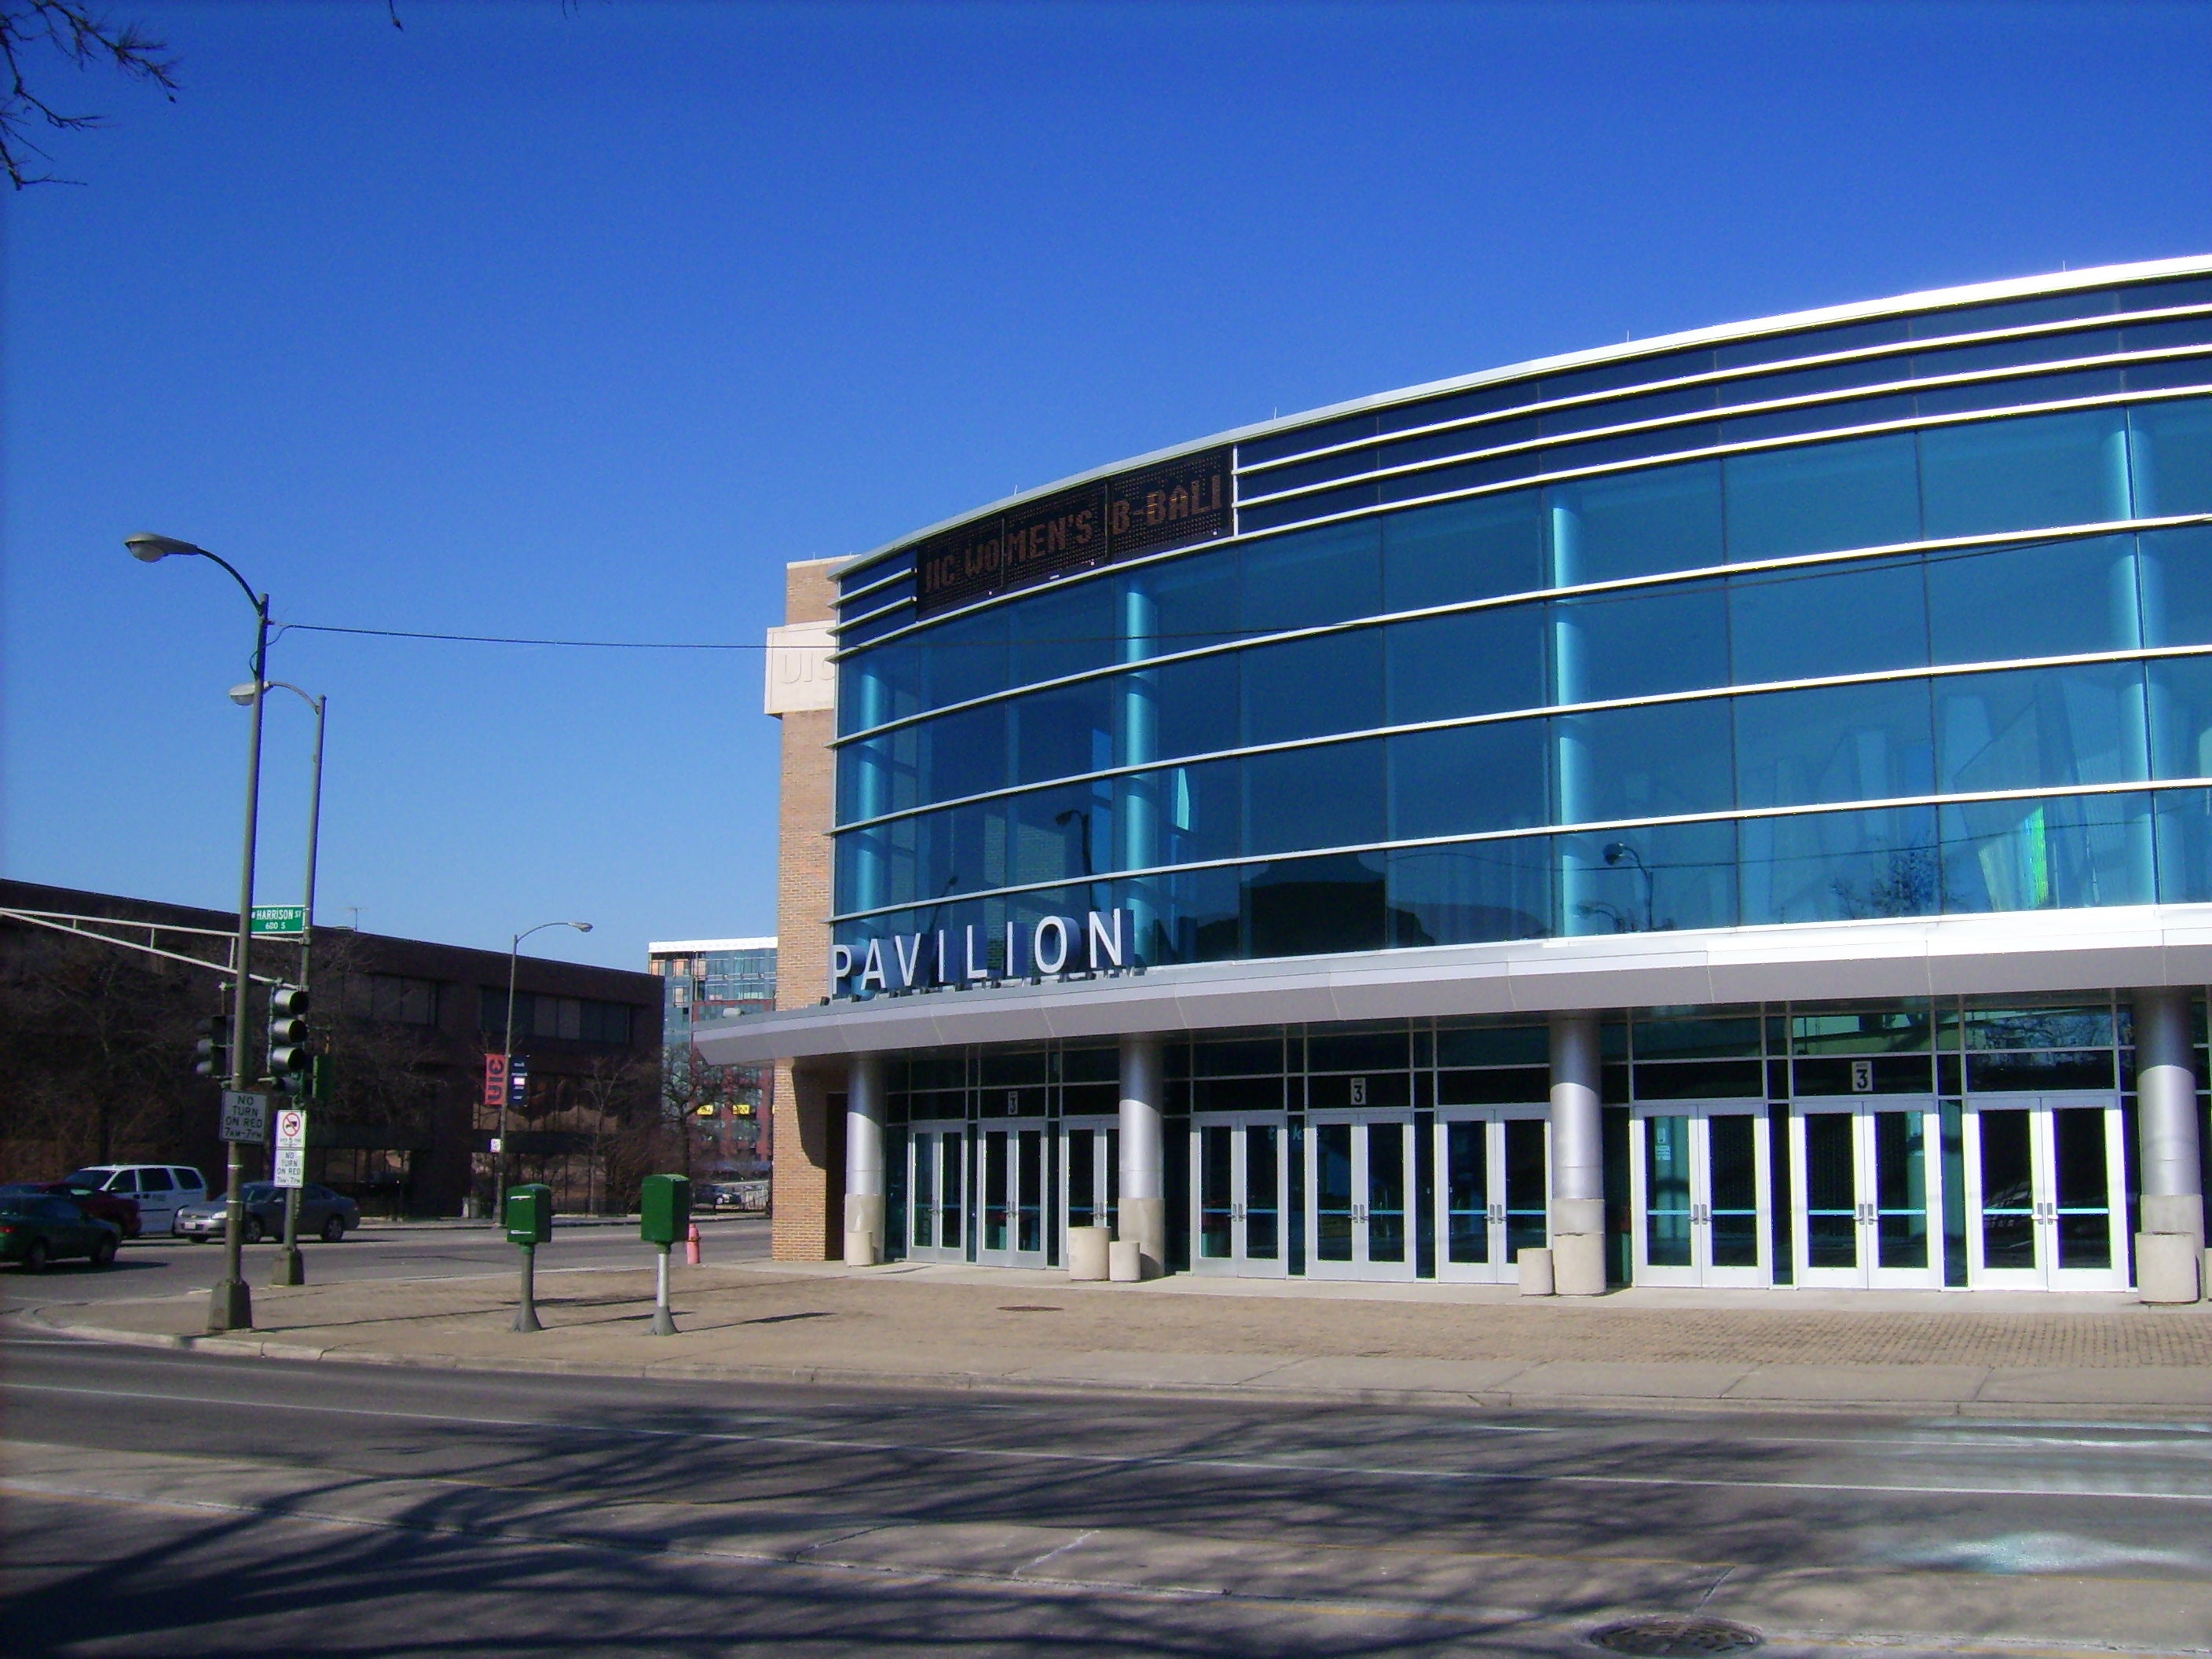 Credit Union 1 Arena at UIC 2022 show schedule & venue information